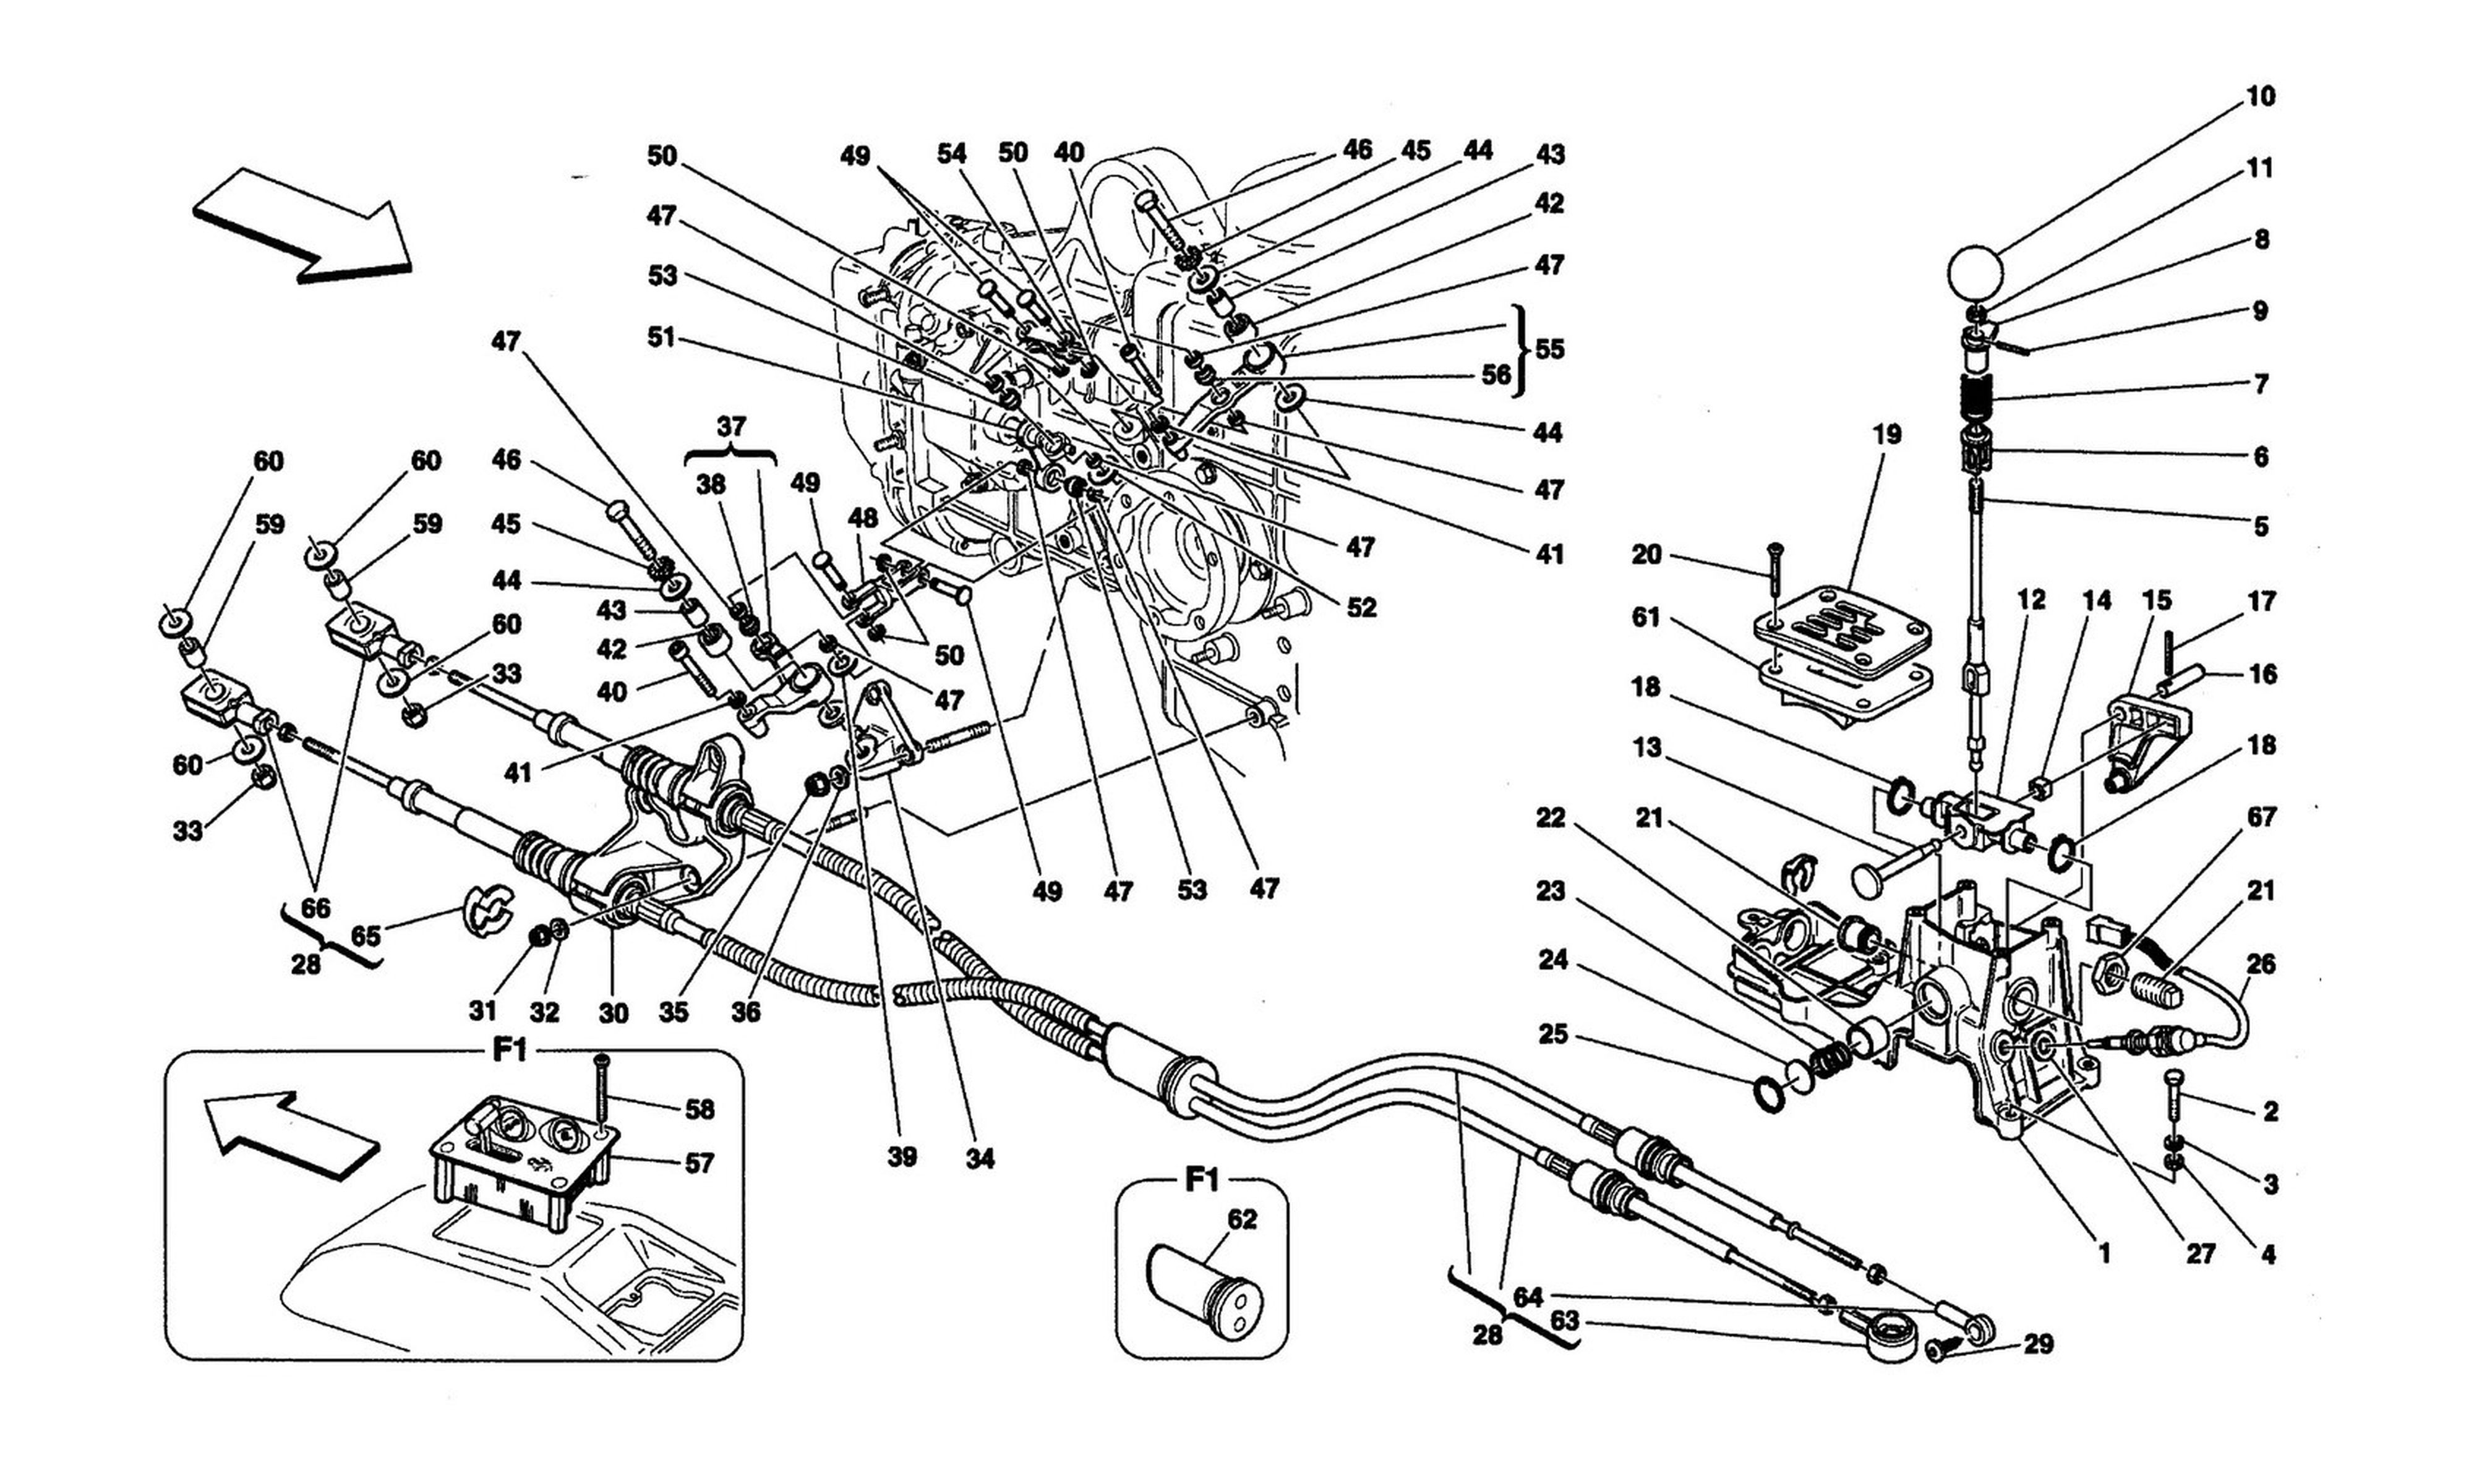 Schematic: Outside Gearbox Controls